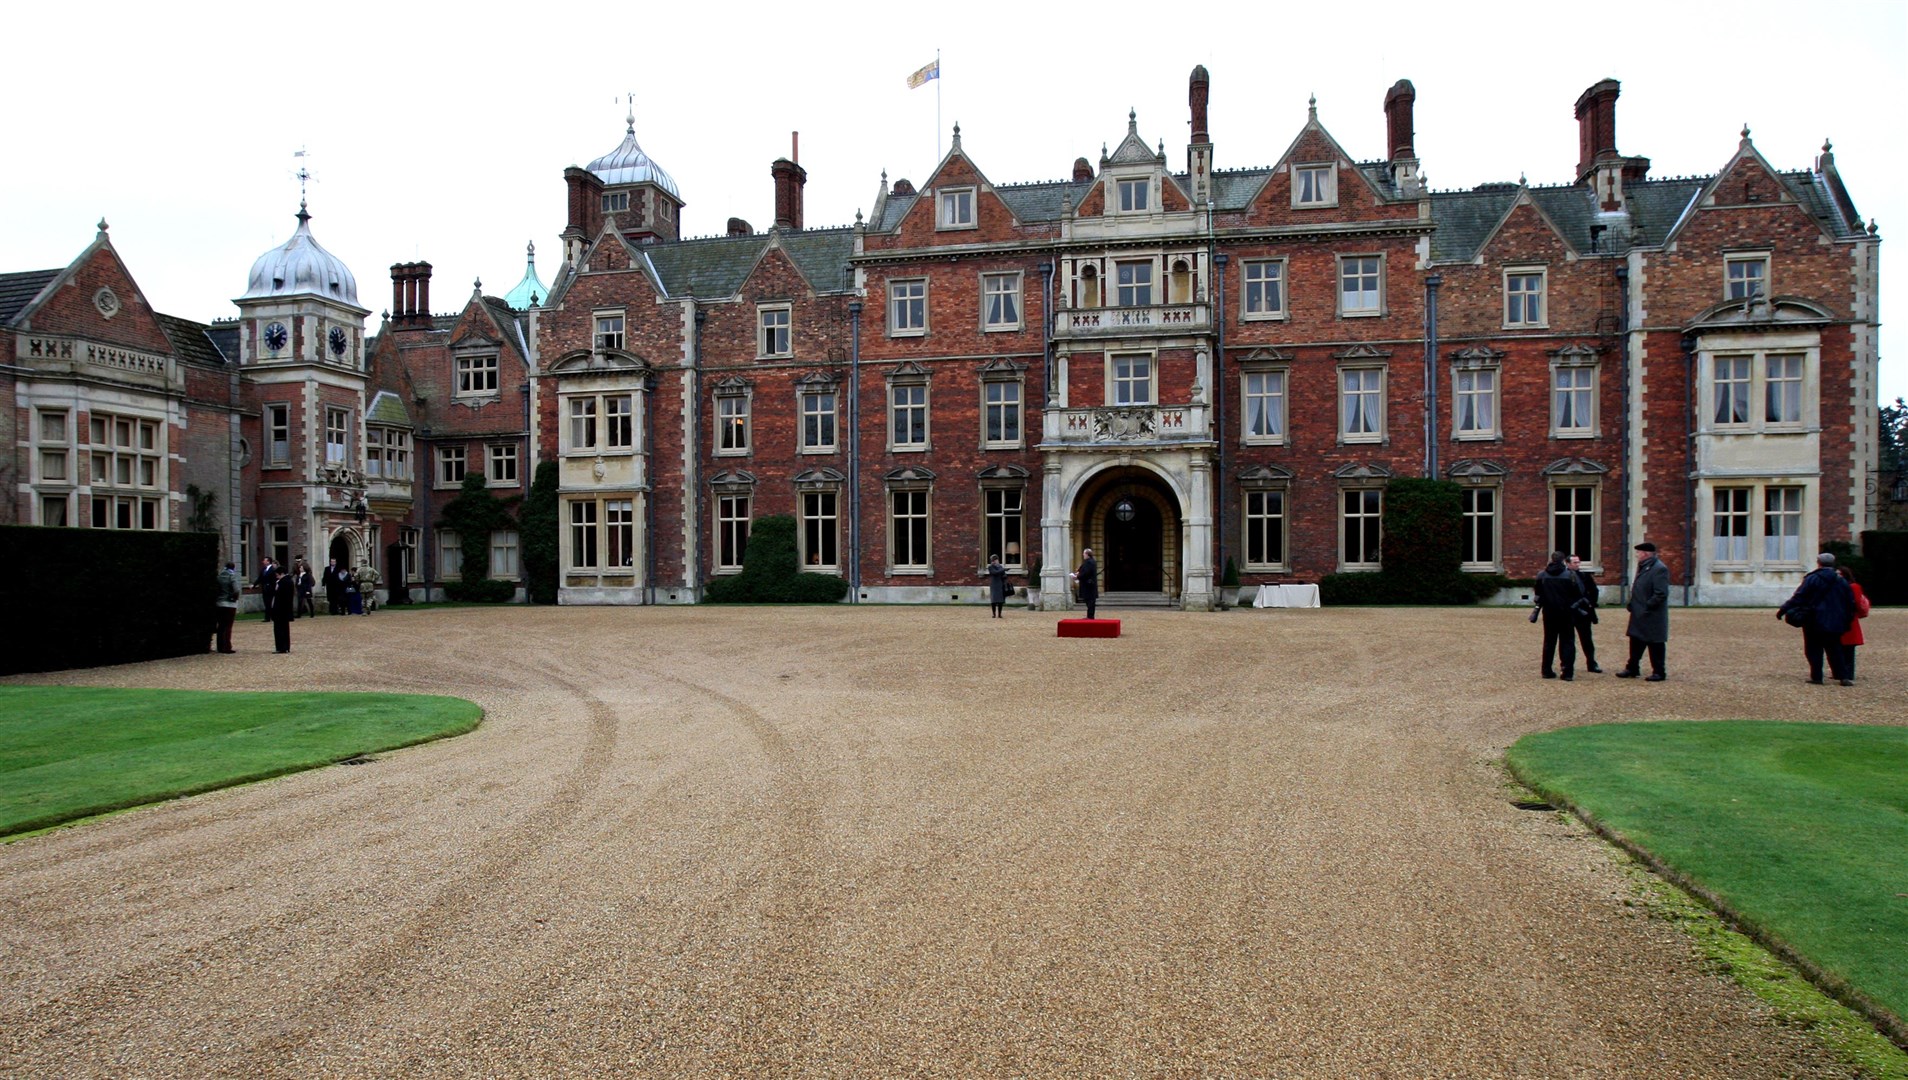 Members of the royal family will spend the day at the Norfolk estate (Chris Radburn/PA)